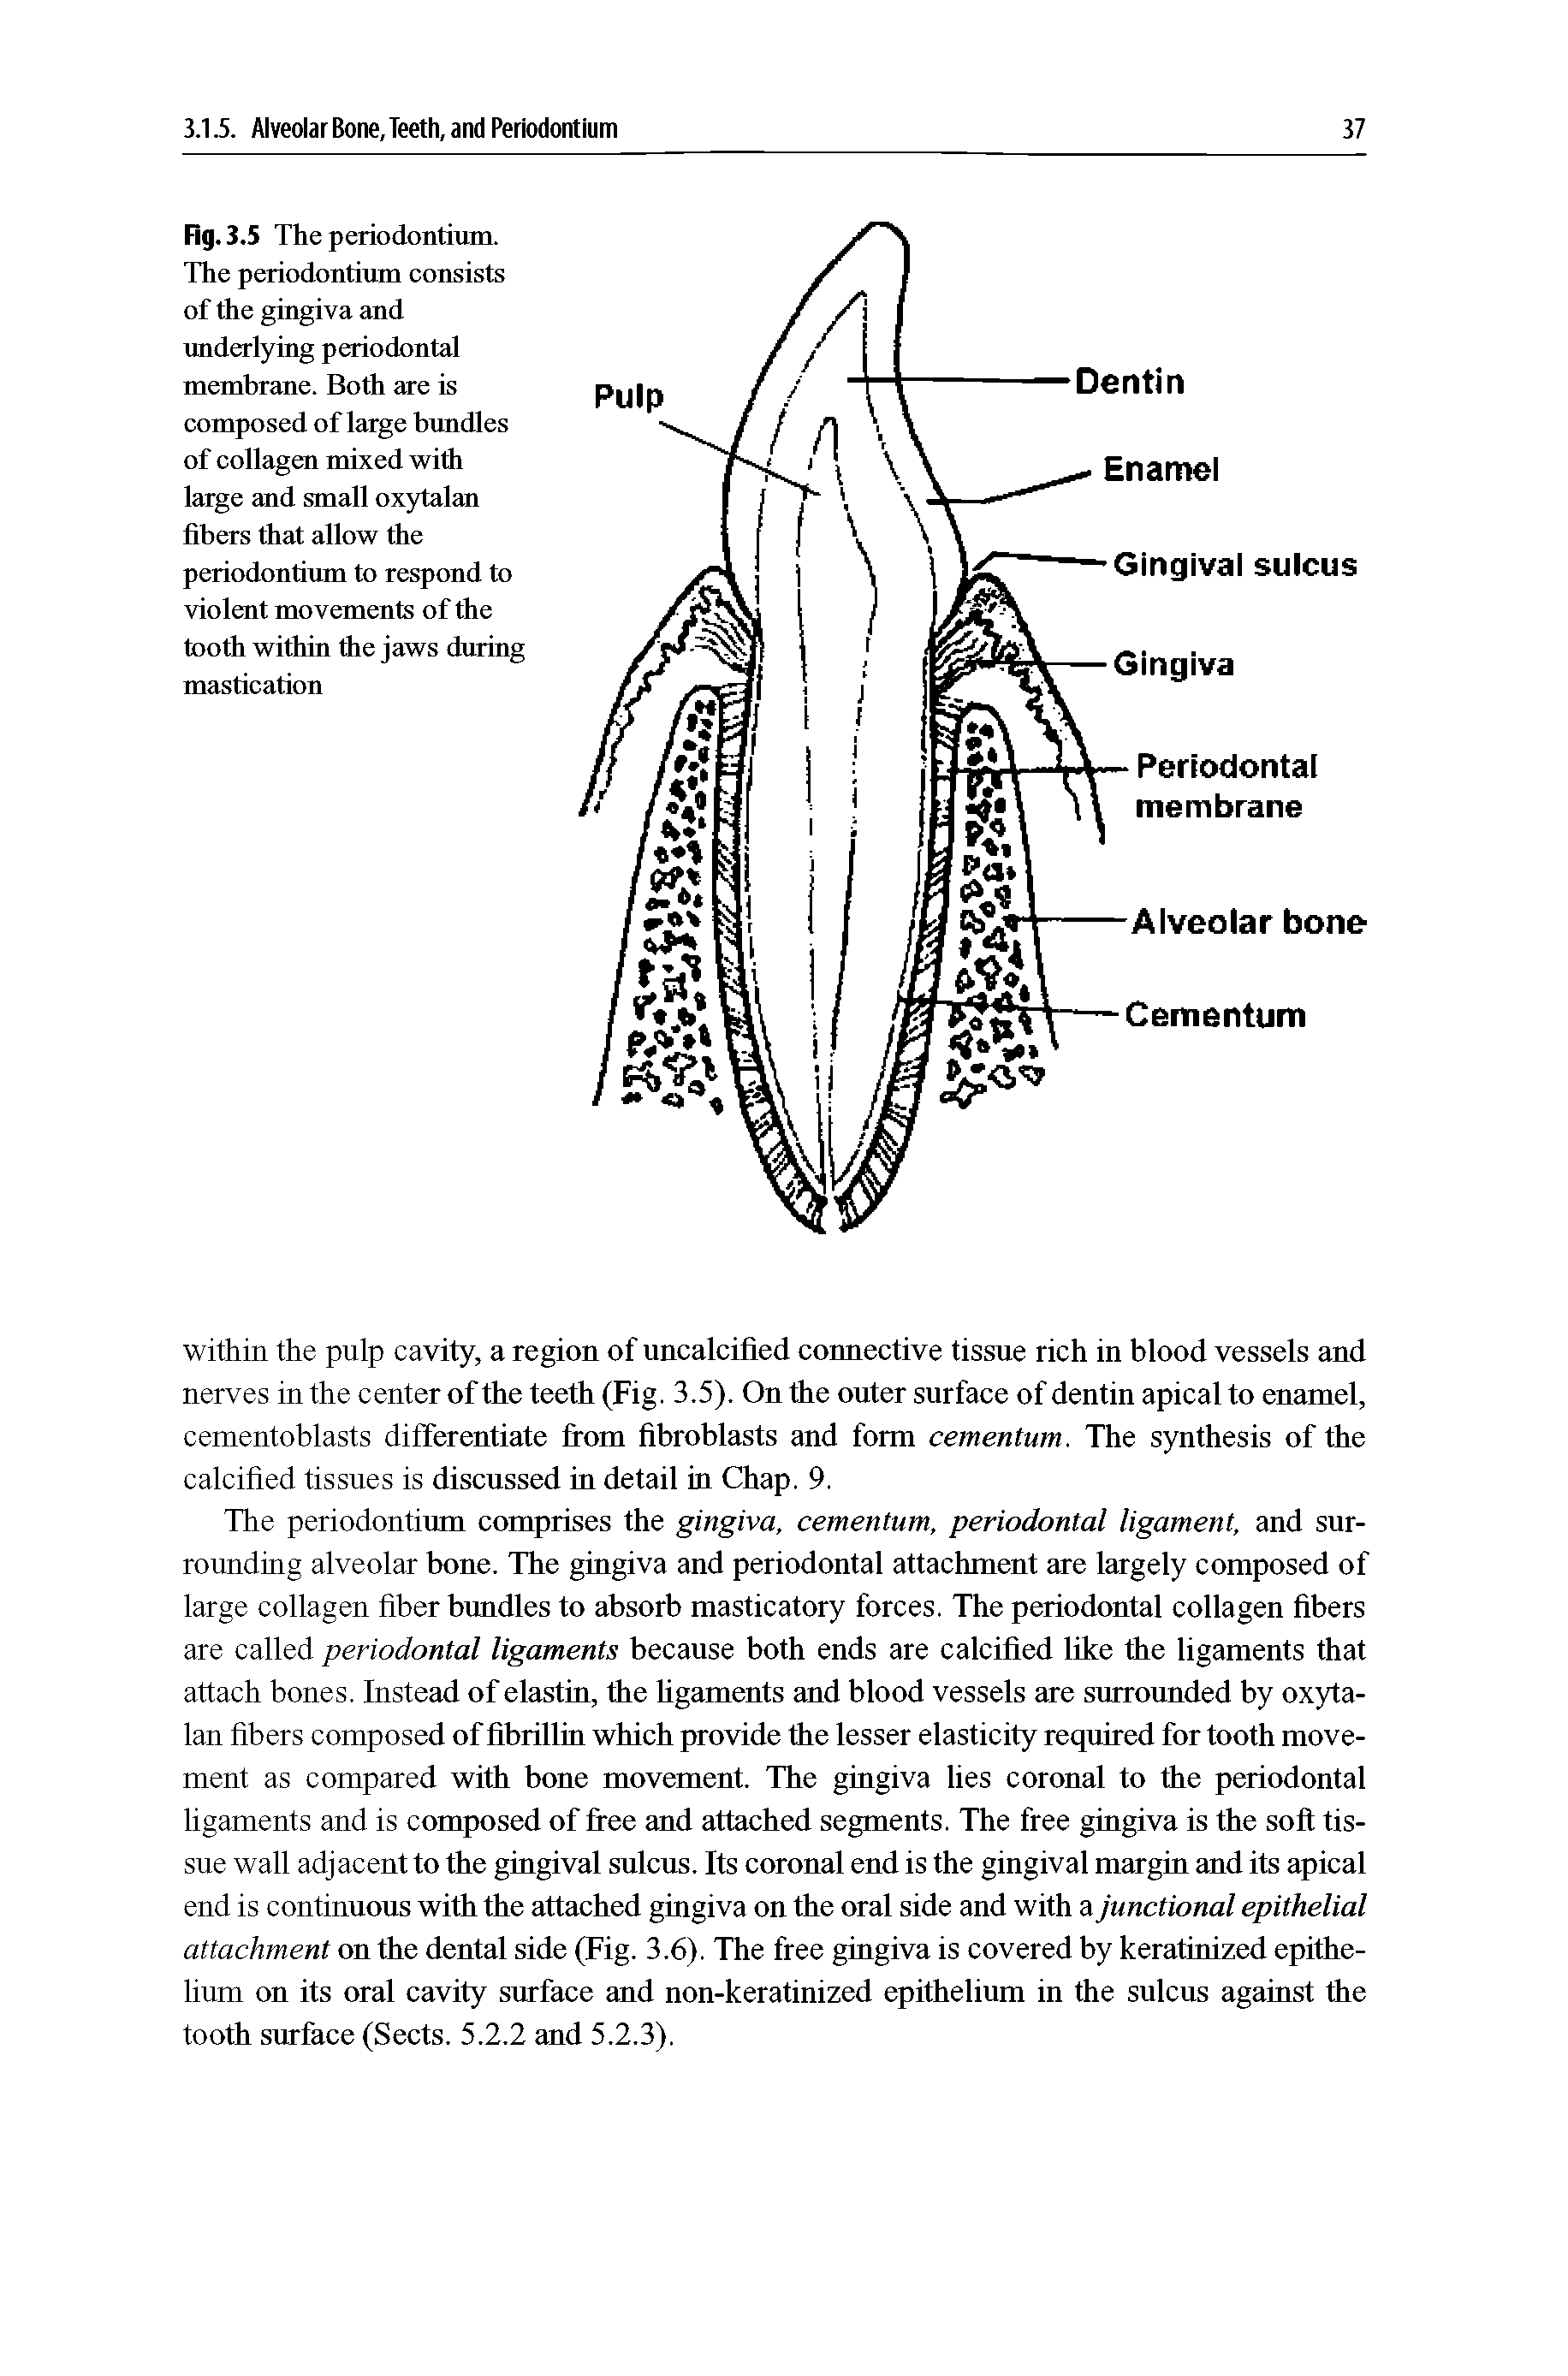 Fig. 3.5 The periodontium. The periodontium consists of the gingiva and underlying periodontal membrane. Both are is composed of large bundles of collagen mixed with large and small oxytalan fibers that allow the periodontium to respond to violent movements of the tooth within the jaws during mastication...